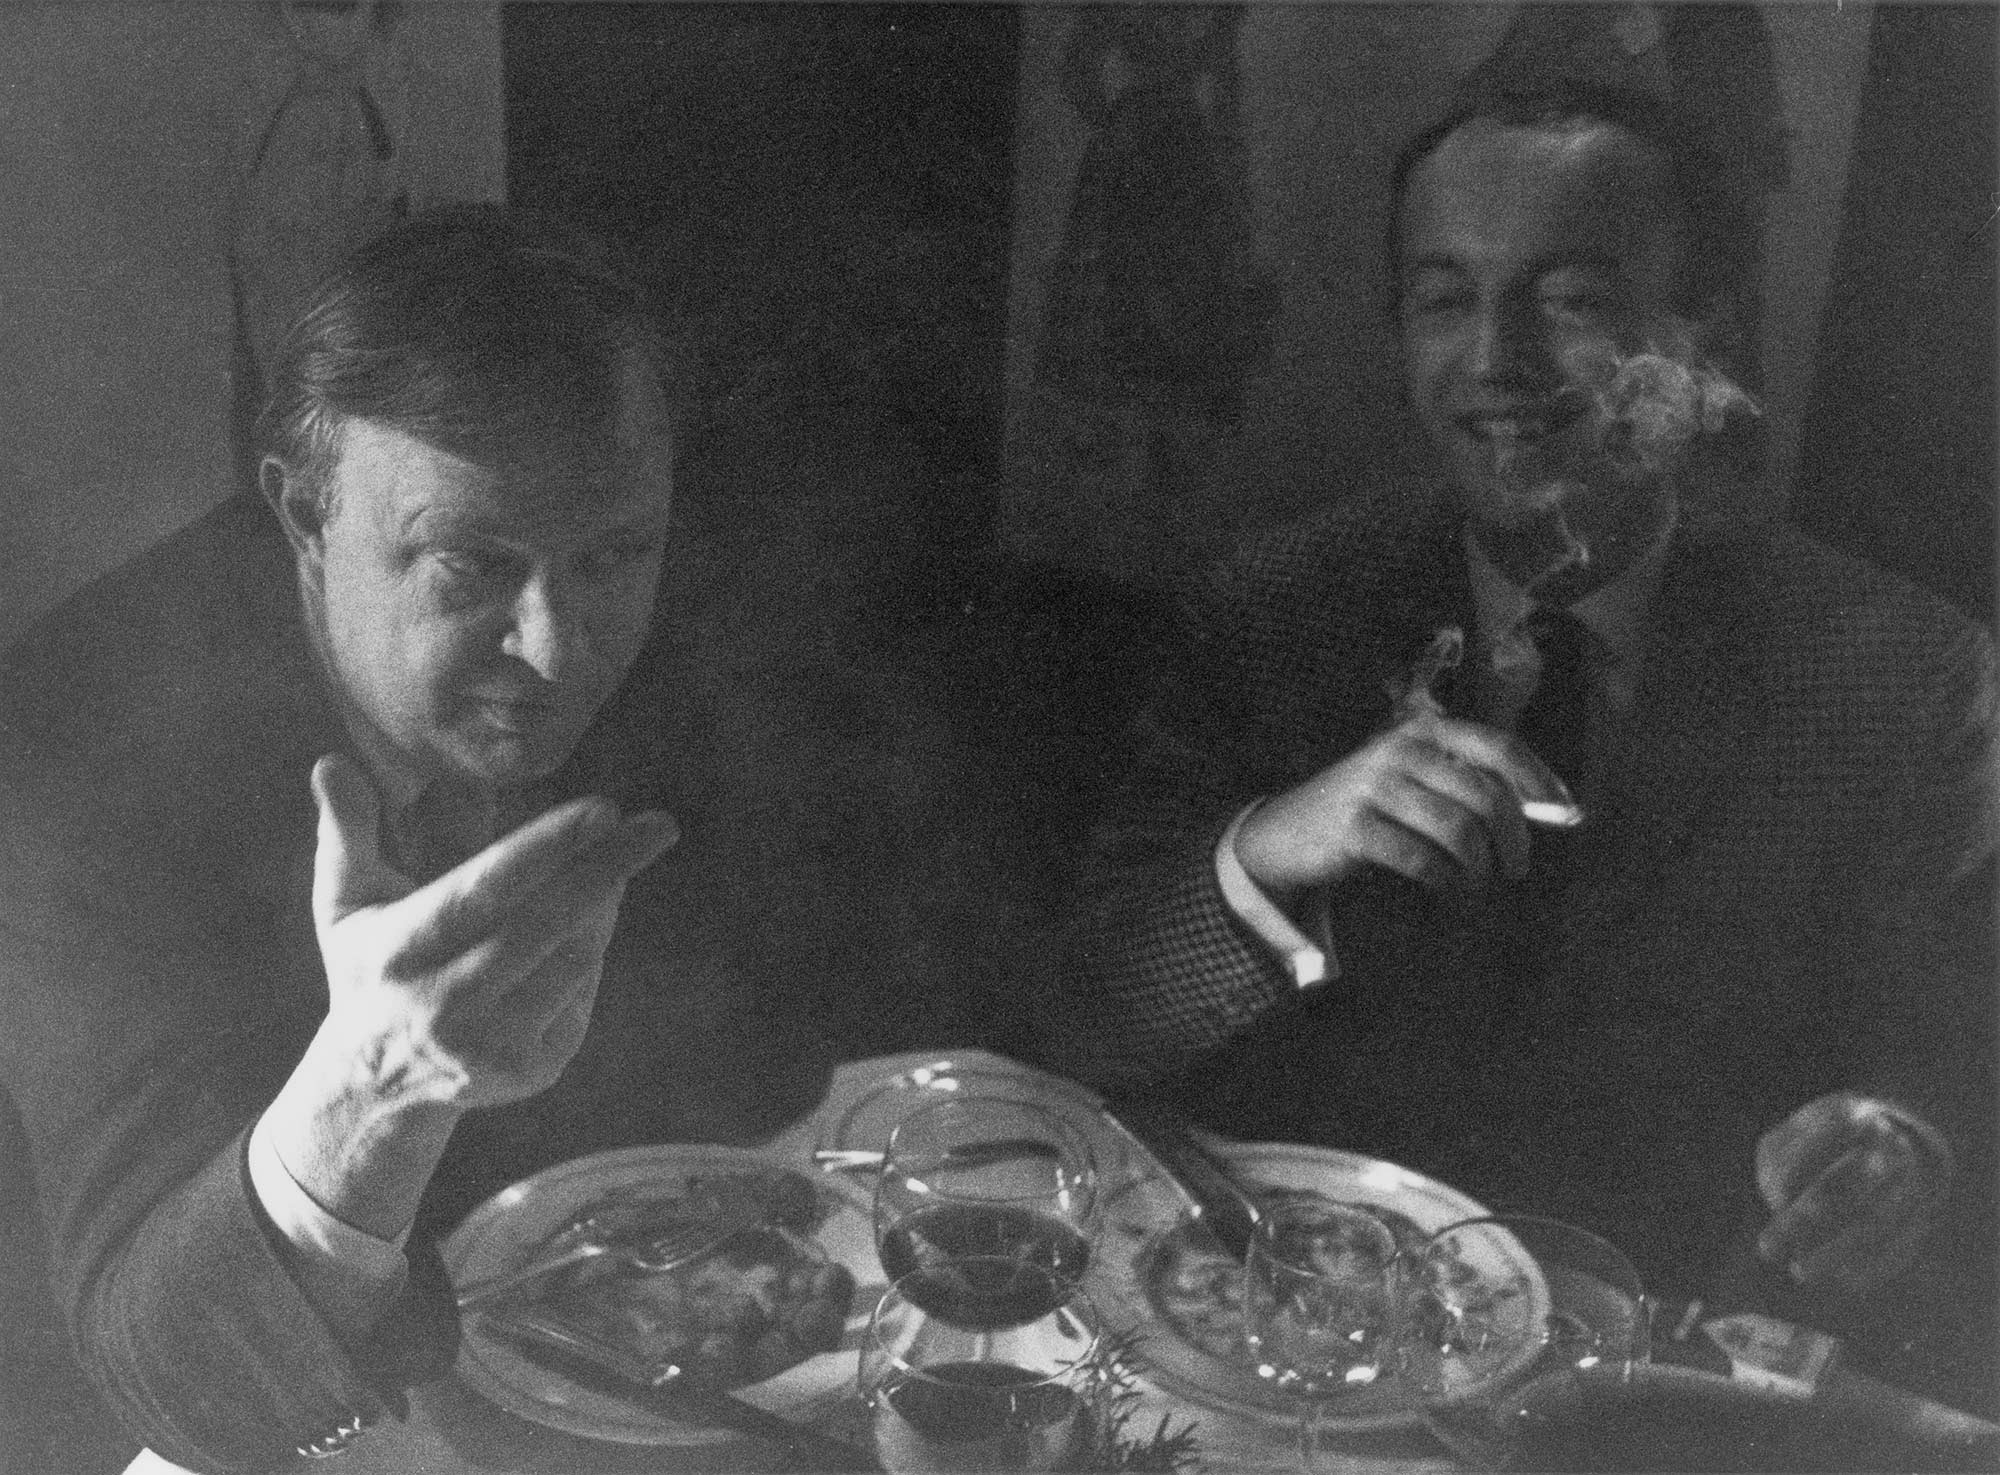 Motherwell and Frank O’Hara smoking cigarettes at a dinner table, 1965